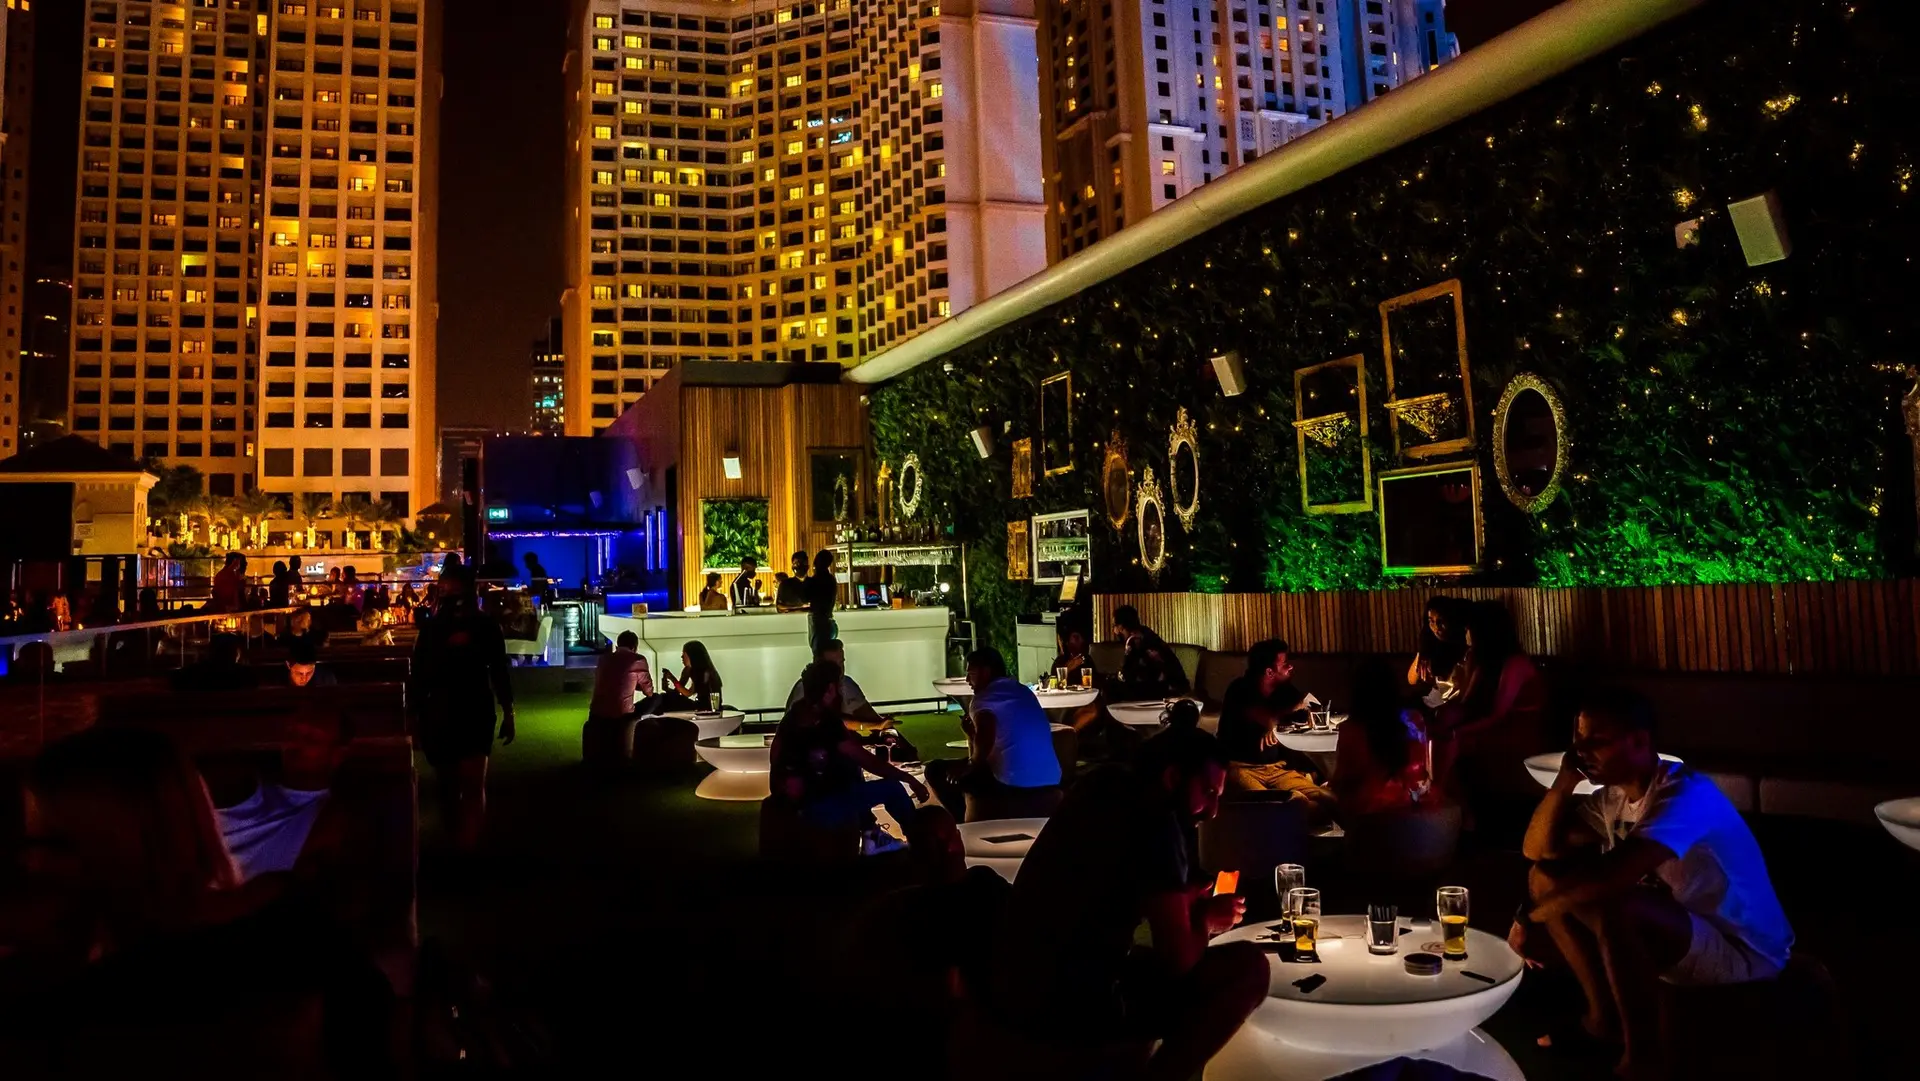 Bla Bla is one of the best rooftop bars in dubai